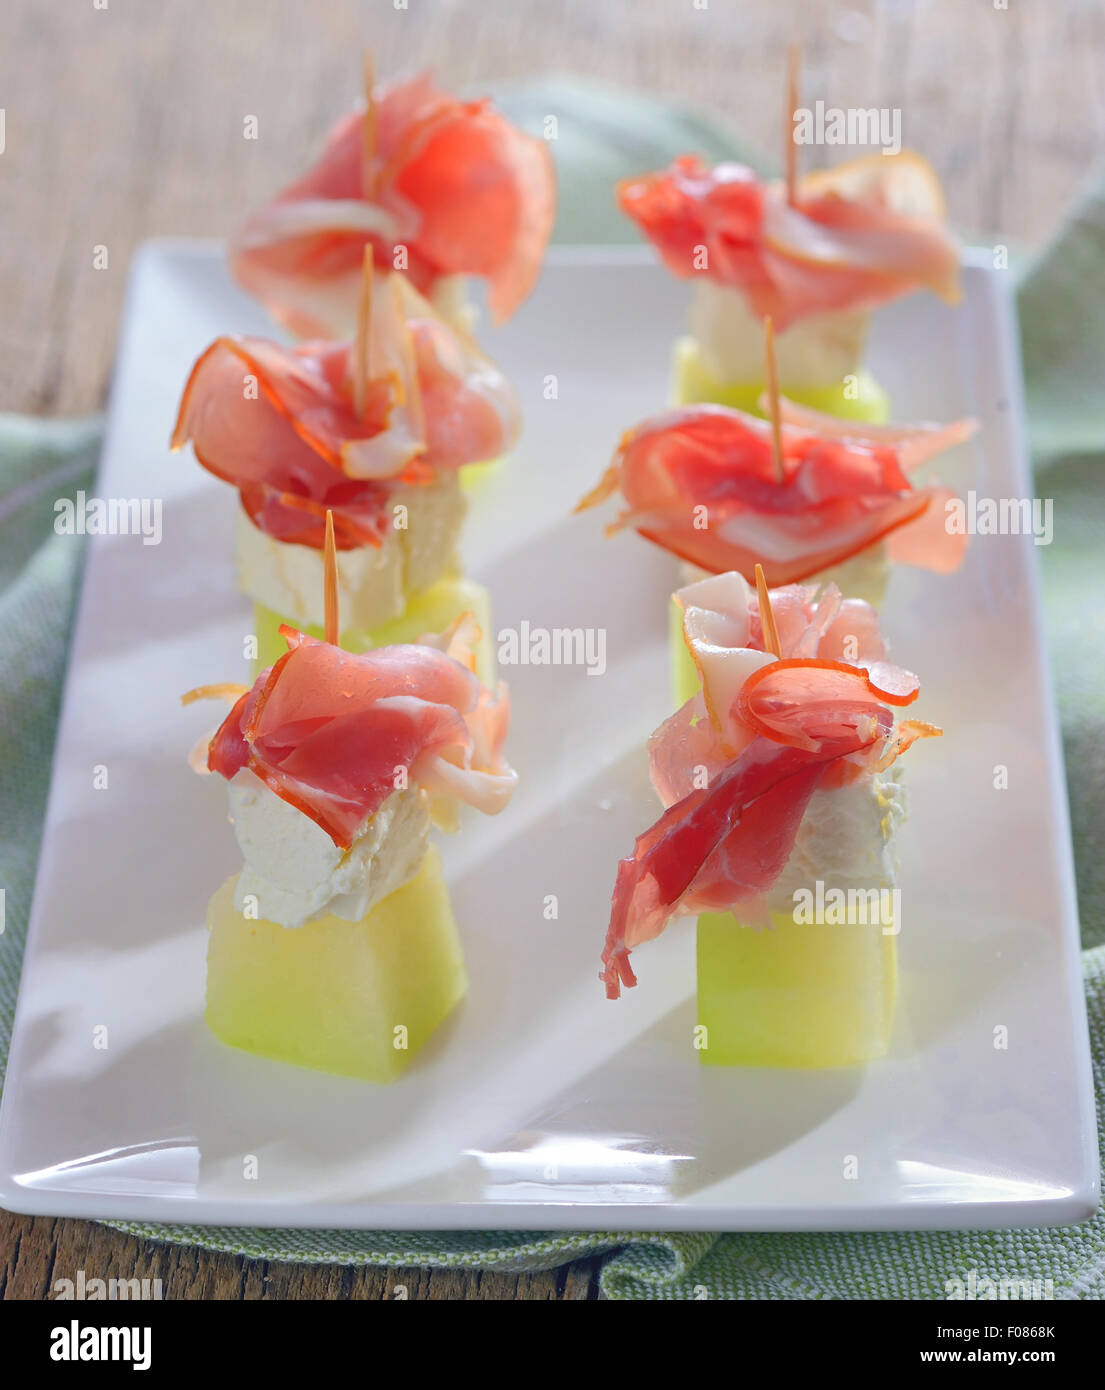 Ham, cheese and melon on plate Stock Photo